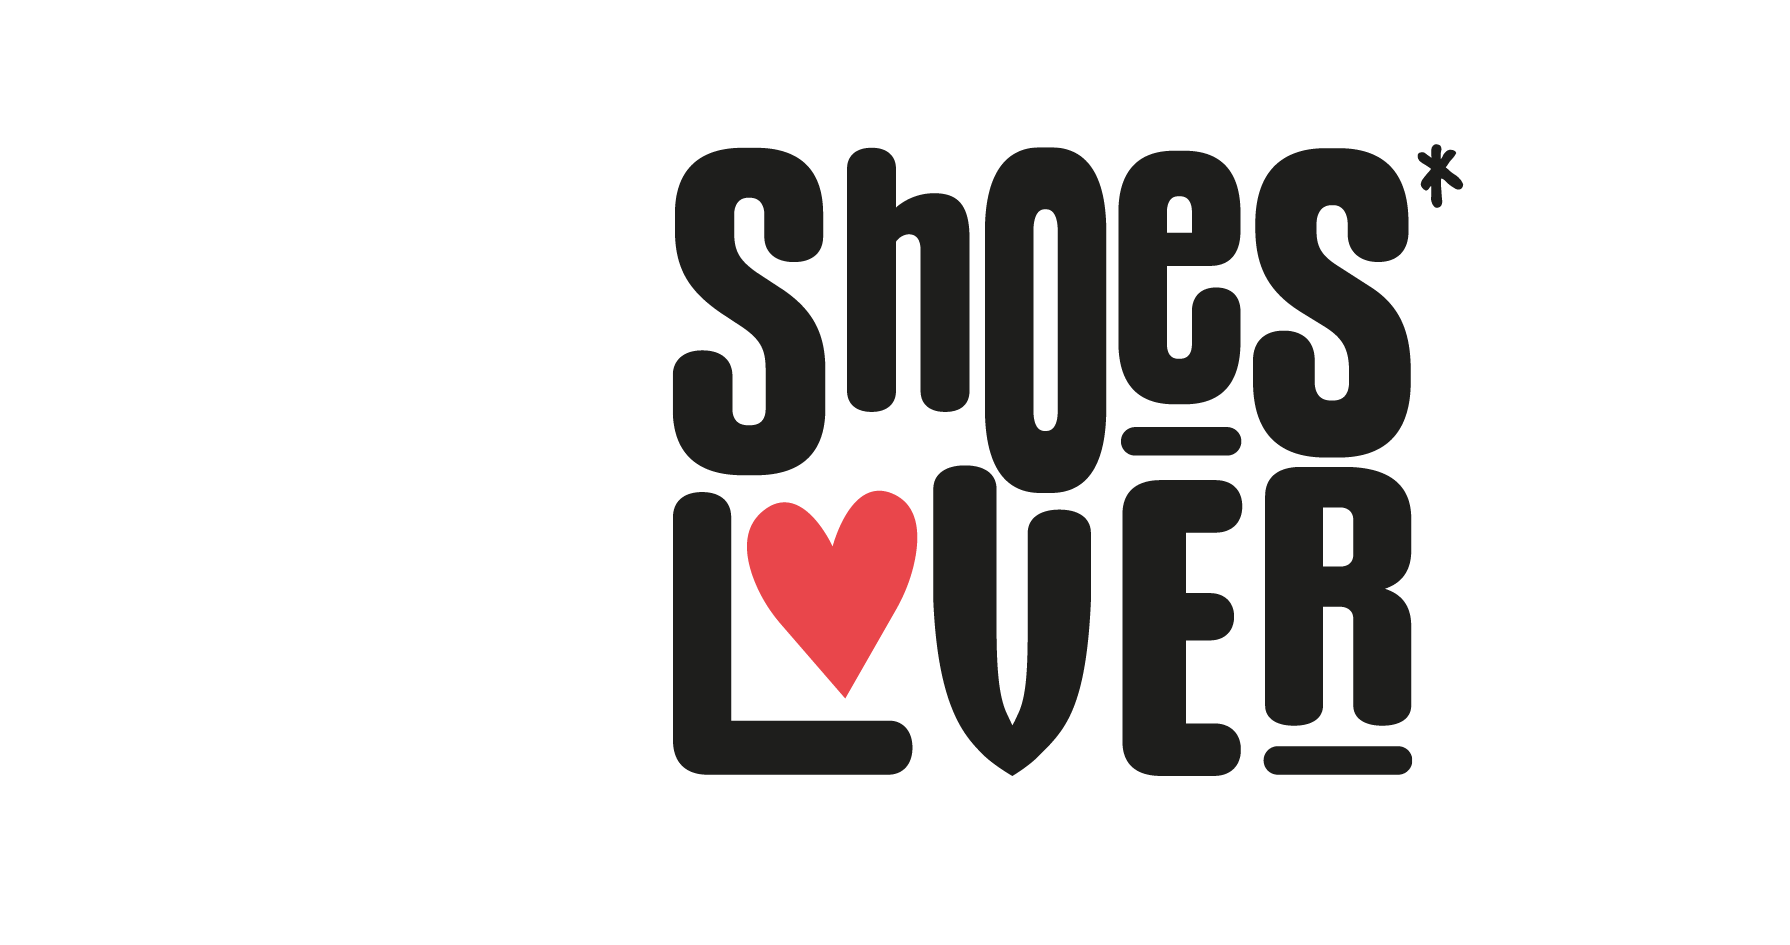 Shoes Lover